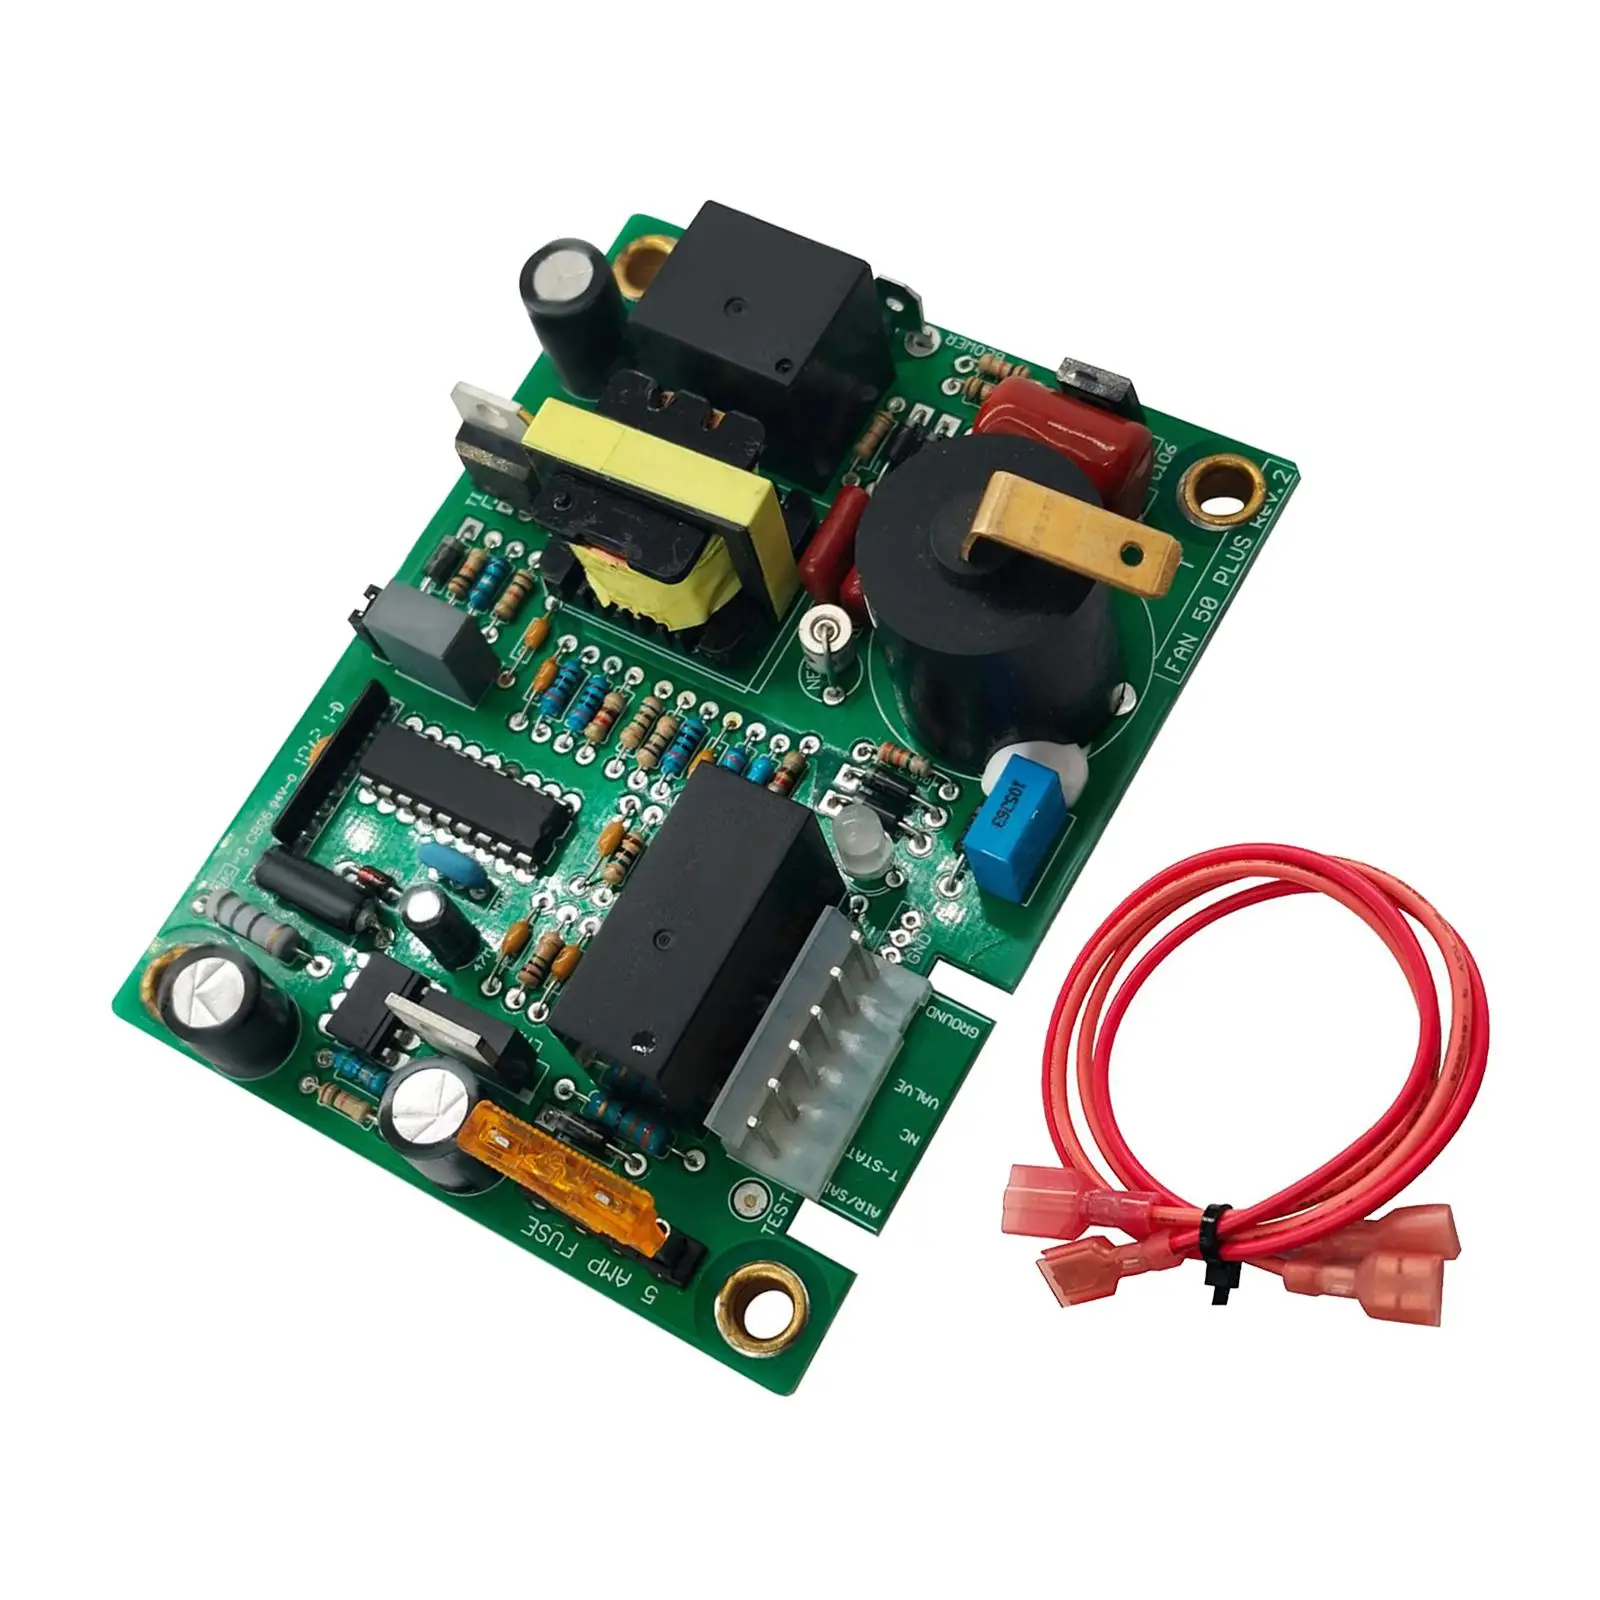 Ignitor Board with Fan Control Professional 12V DC Ignition Controls Board